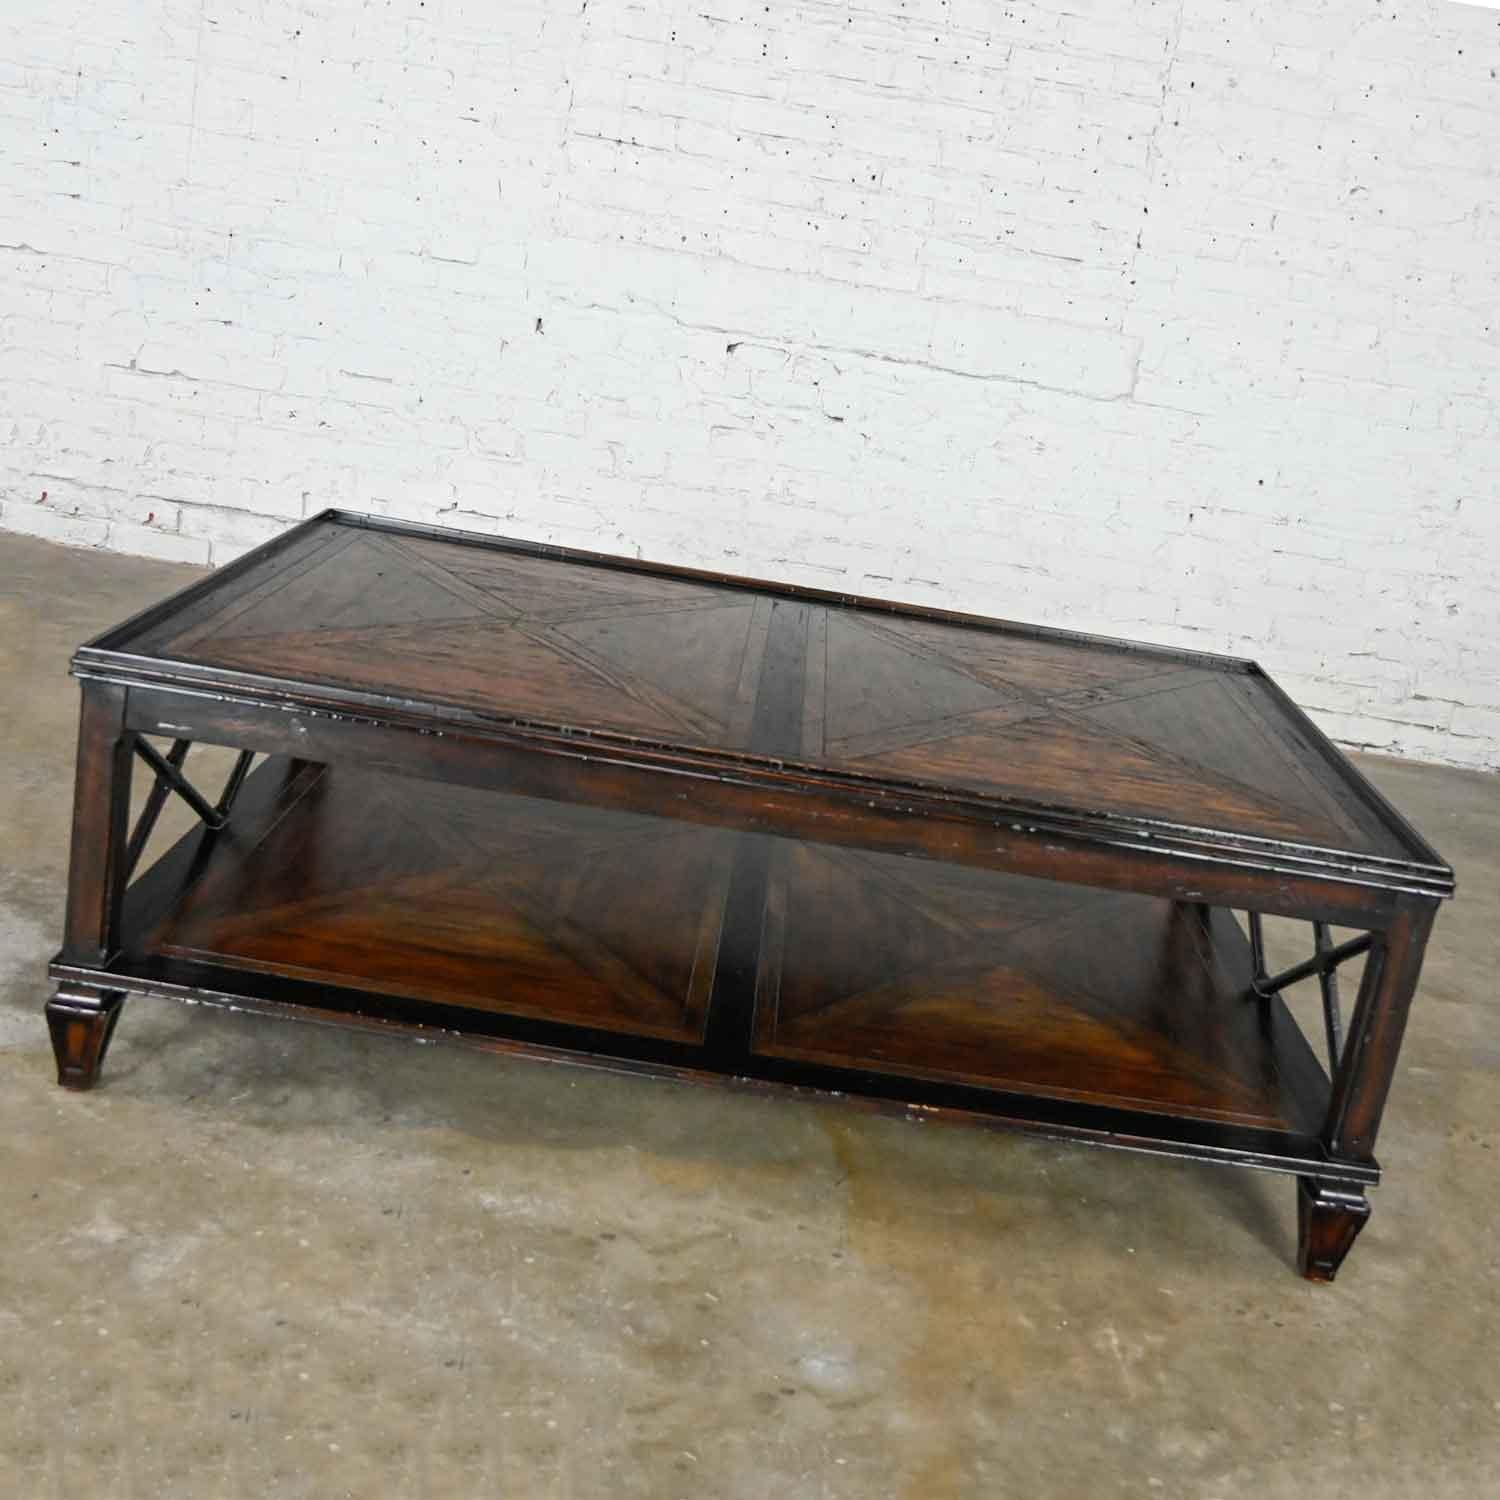 Handsome Theodore Alexander Marst Hill Collection Sumner coffee or cocktail table comprised of mahogany with finished oak and acacia parquetry. Gorgeous condition, keeping in mind that this is vintage and not new so will have signs of use and wear.